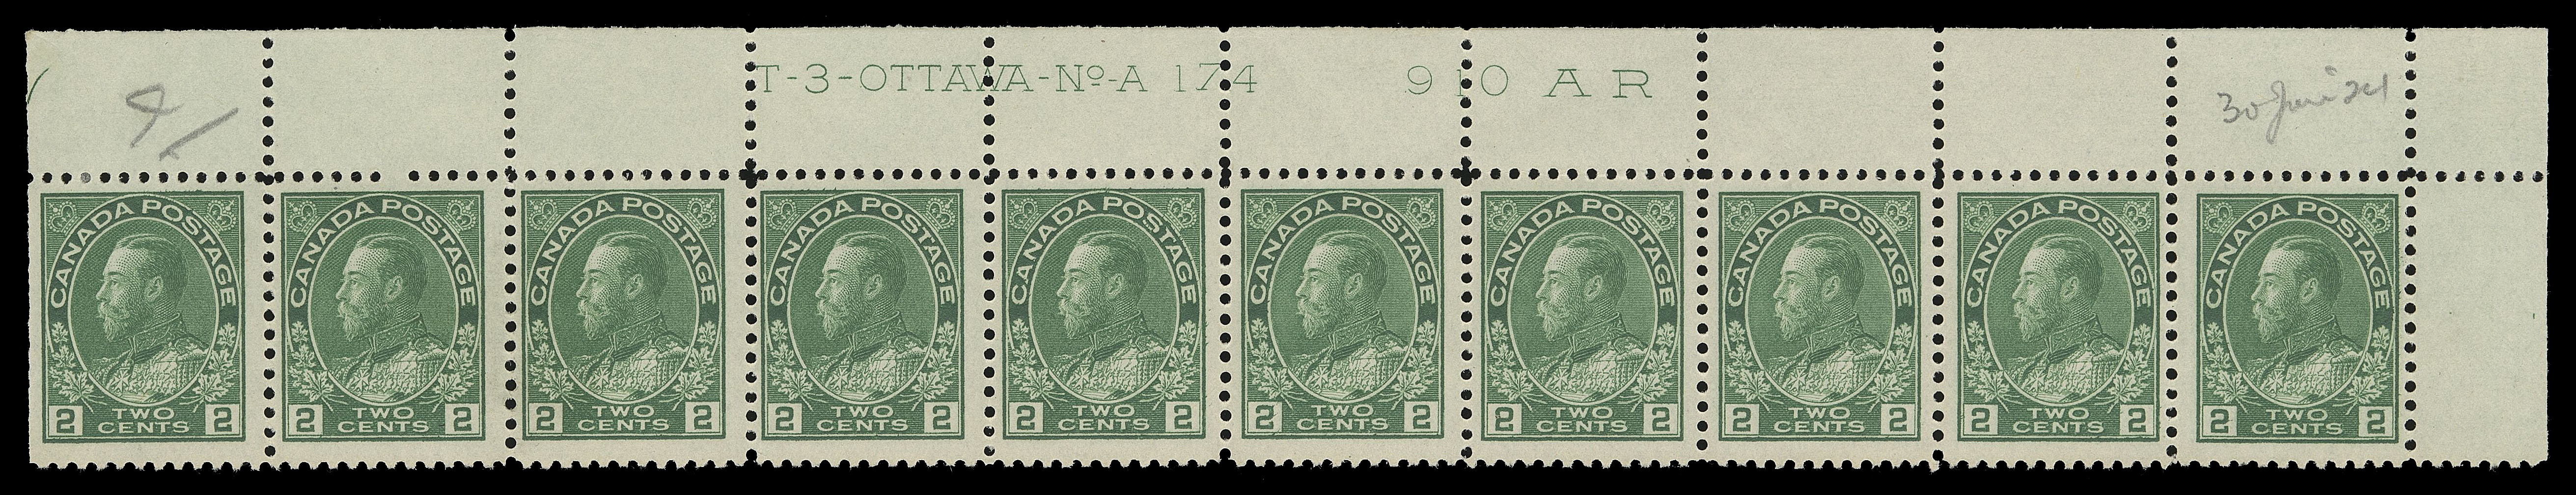 ADMIRAL STAMPS  107 shade,Matching upper right Plate 173 & 174 strips of ten, each reasonably centered with lovely bright colour, LH in selvedge just touching straight edged stamp, other nine stamps NH, F-VF; both penciled "30 Jan 